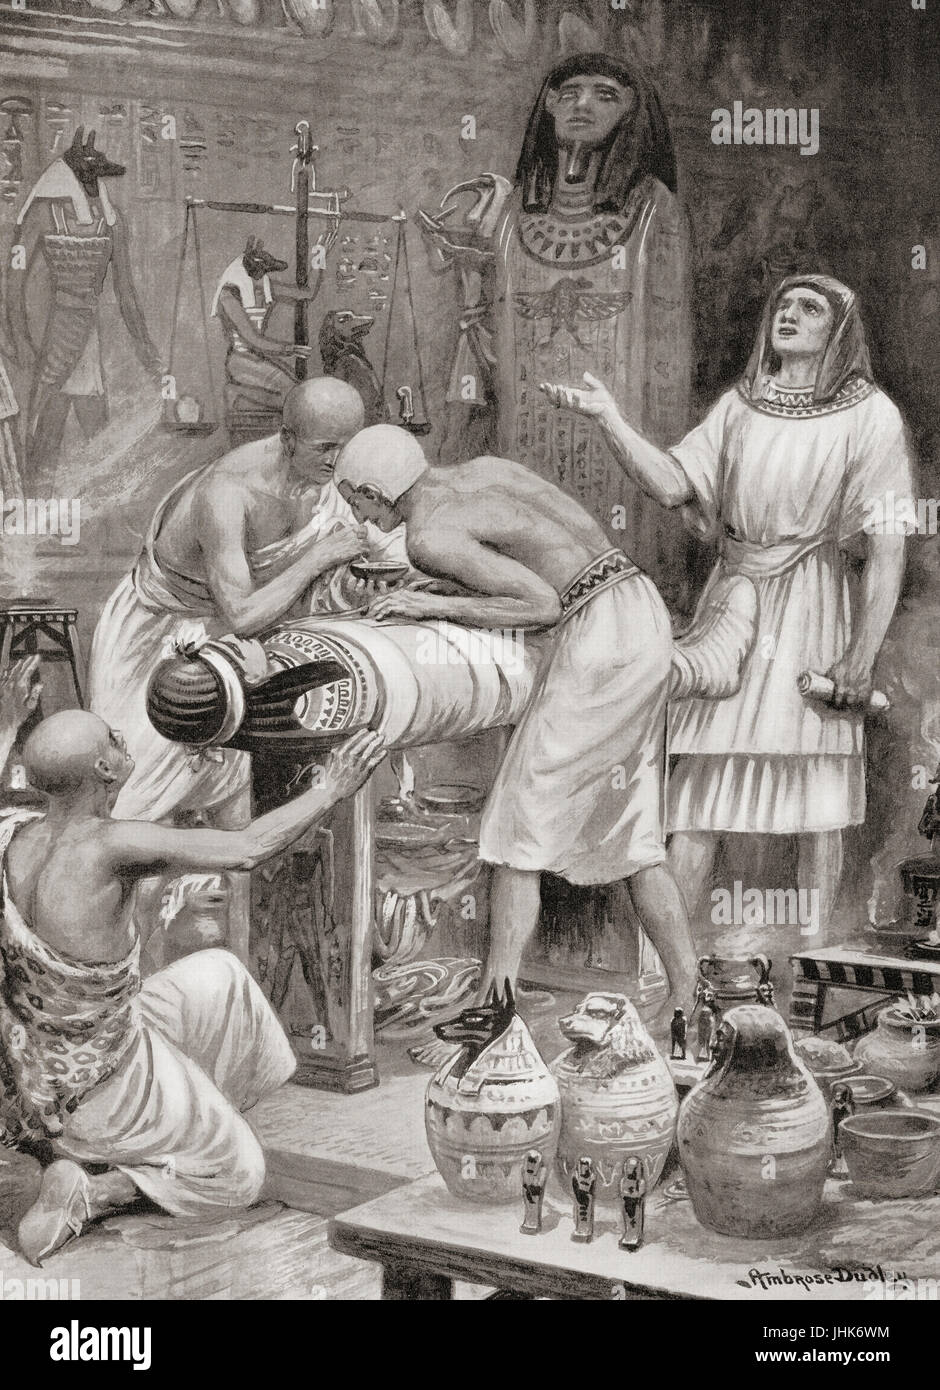 Embalming a body in ancient Egypt. This was done by removing organs, ridding the body of moisture, and covering the body with natron.  After the painting by Ambrose Dudley (1867-1951).  From Hutchinson's History of the Nations, published 1915. Stock Photo